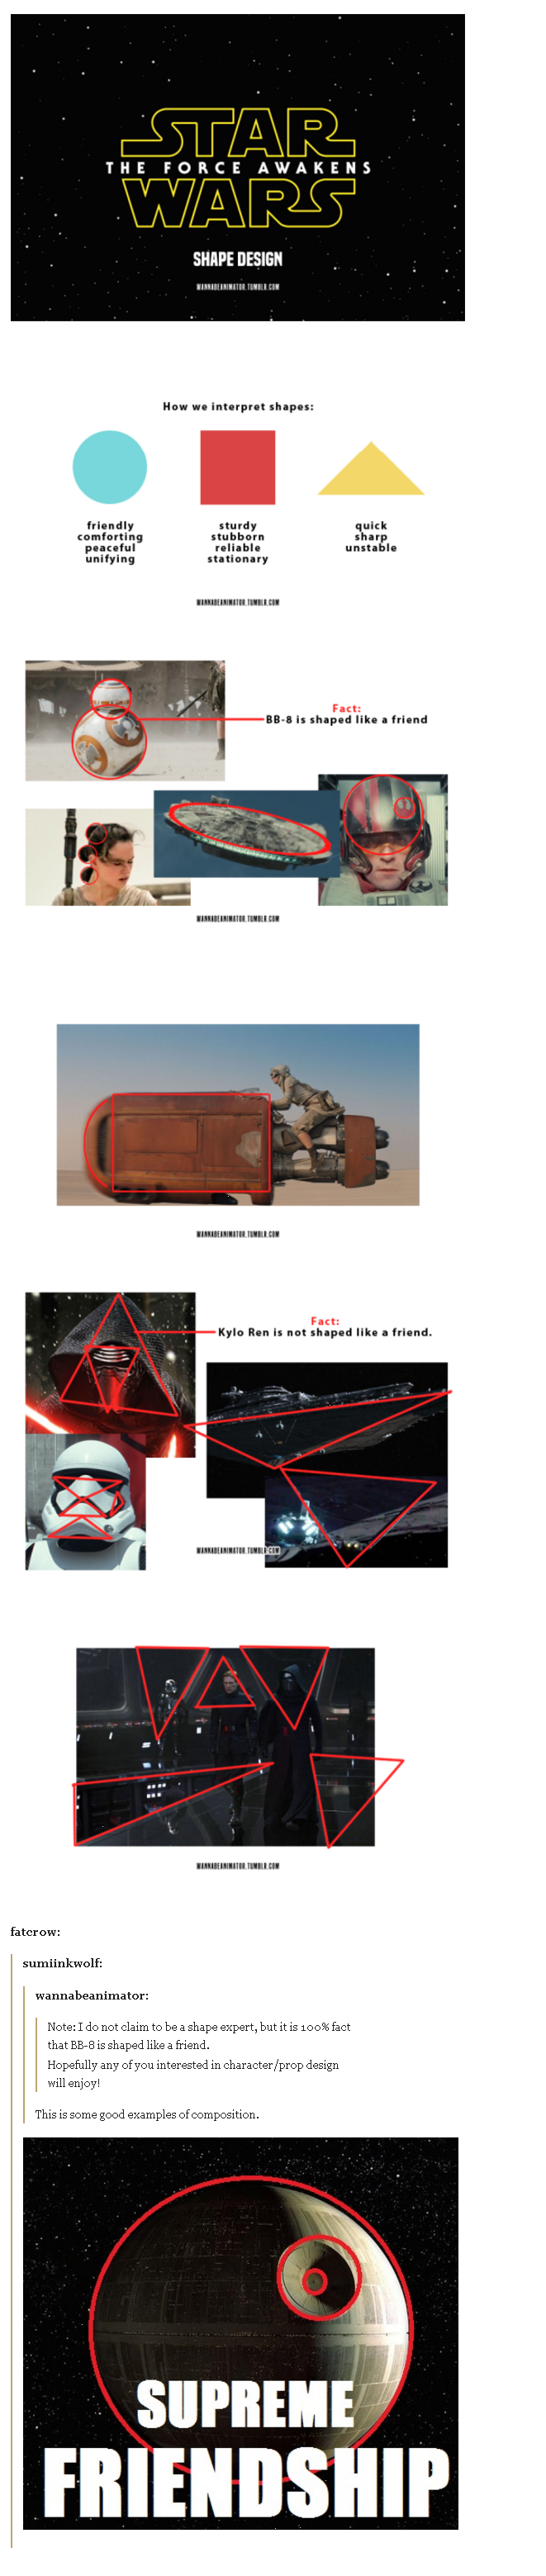 The shapes of Star Wars